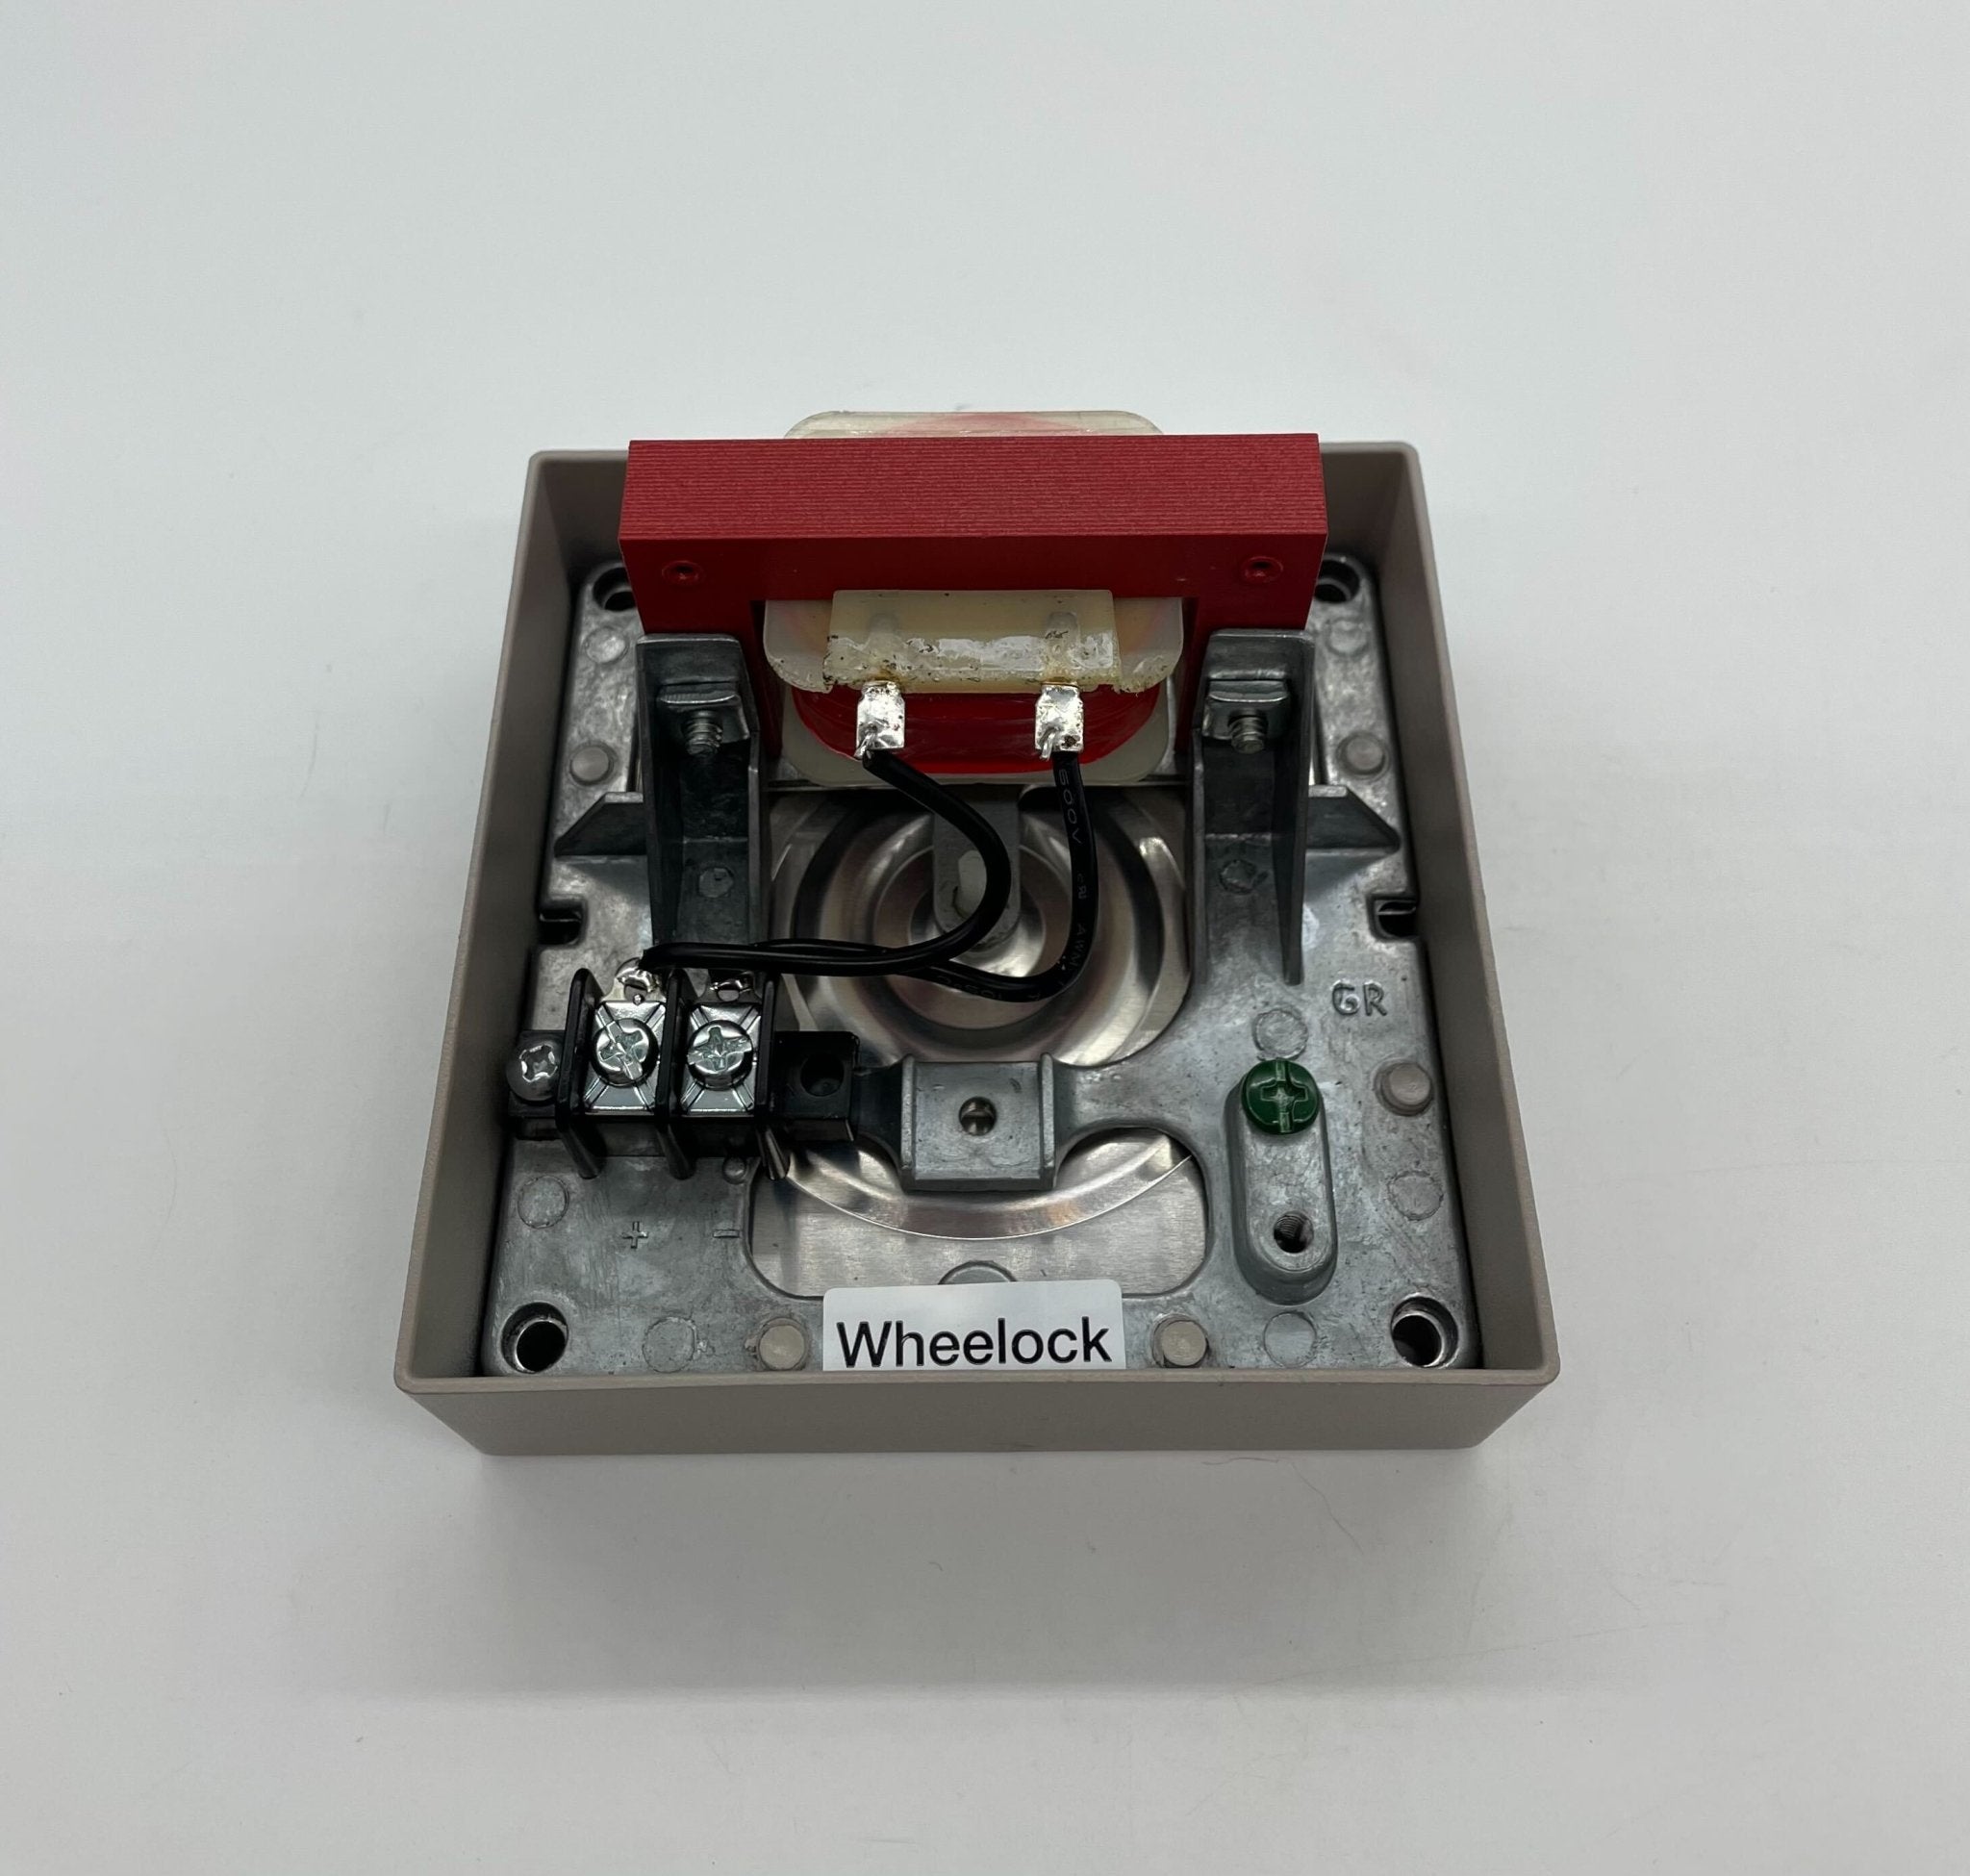 Wheelock 31T-115-S - The Fire Alarm Supplier